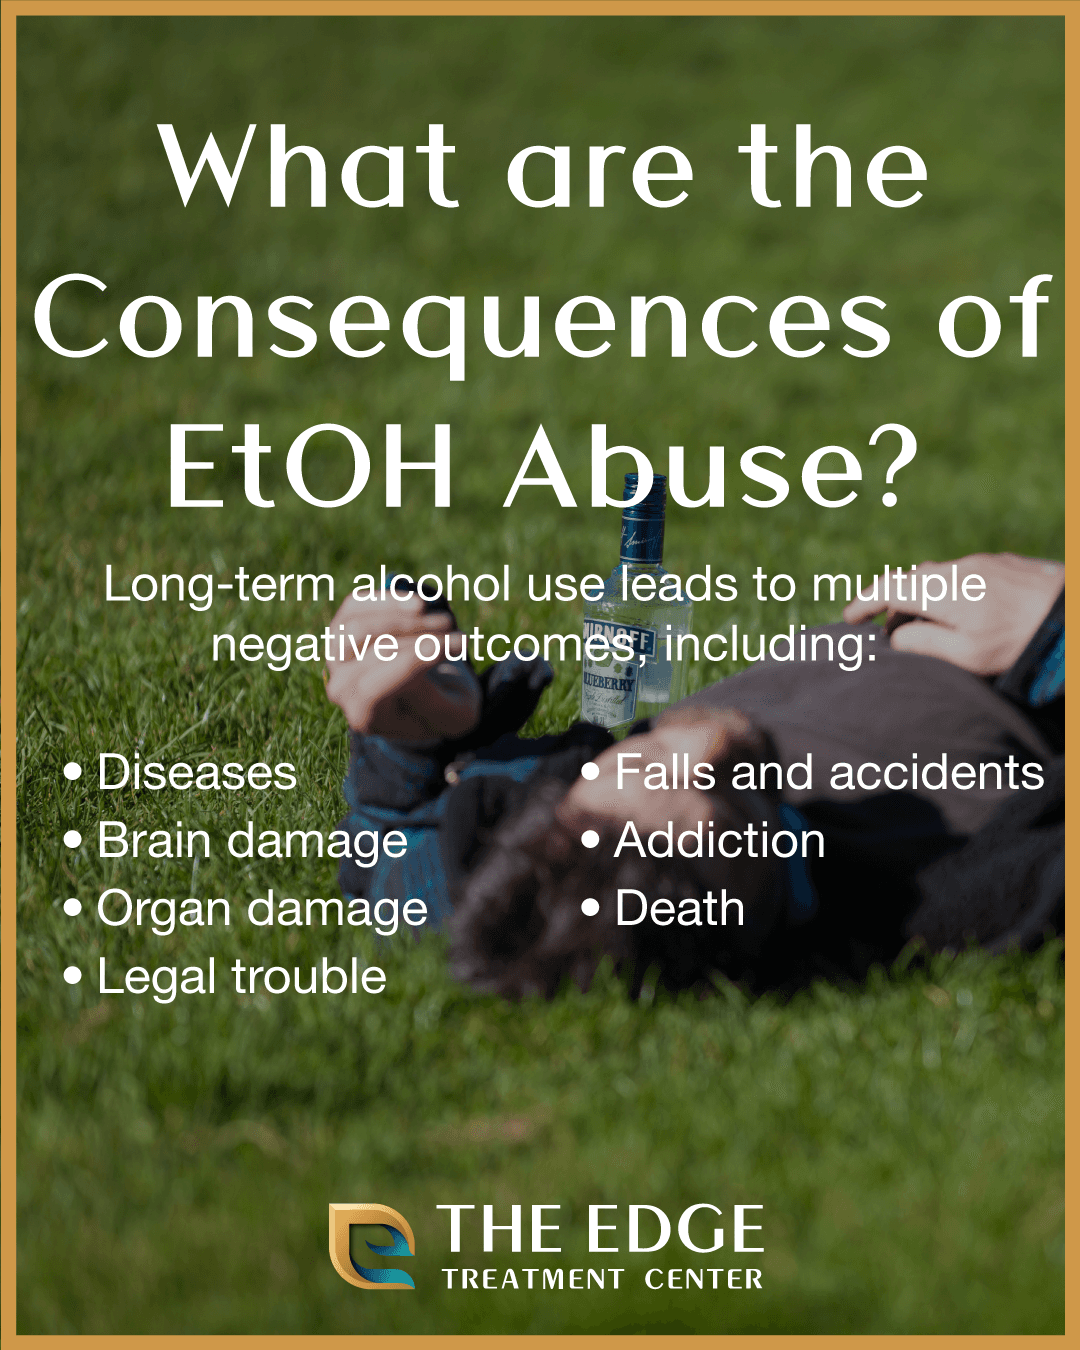 What are the Consequences of EtOH Abuse?